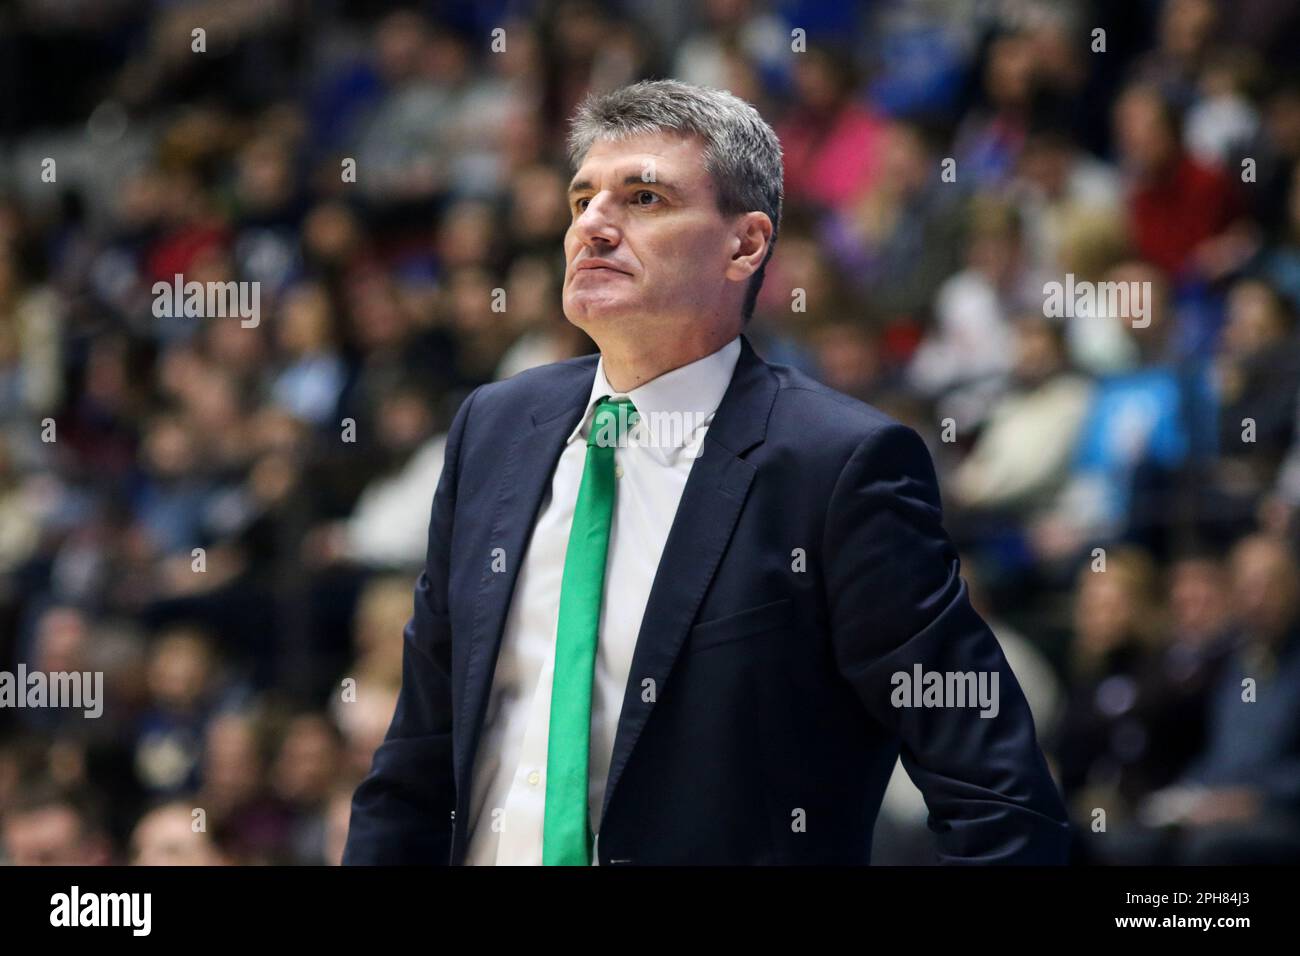 Saint Petersburg, Russia. 26th Mar, 2023. Velimir Perasovic, head coach of UNICS  Kazan seen during the VTB United League basketball match, Second stage,  between Zenit Saint Petersburg and UNICS Kazan at Sibur